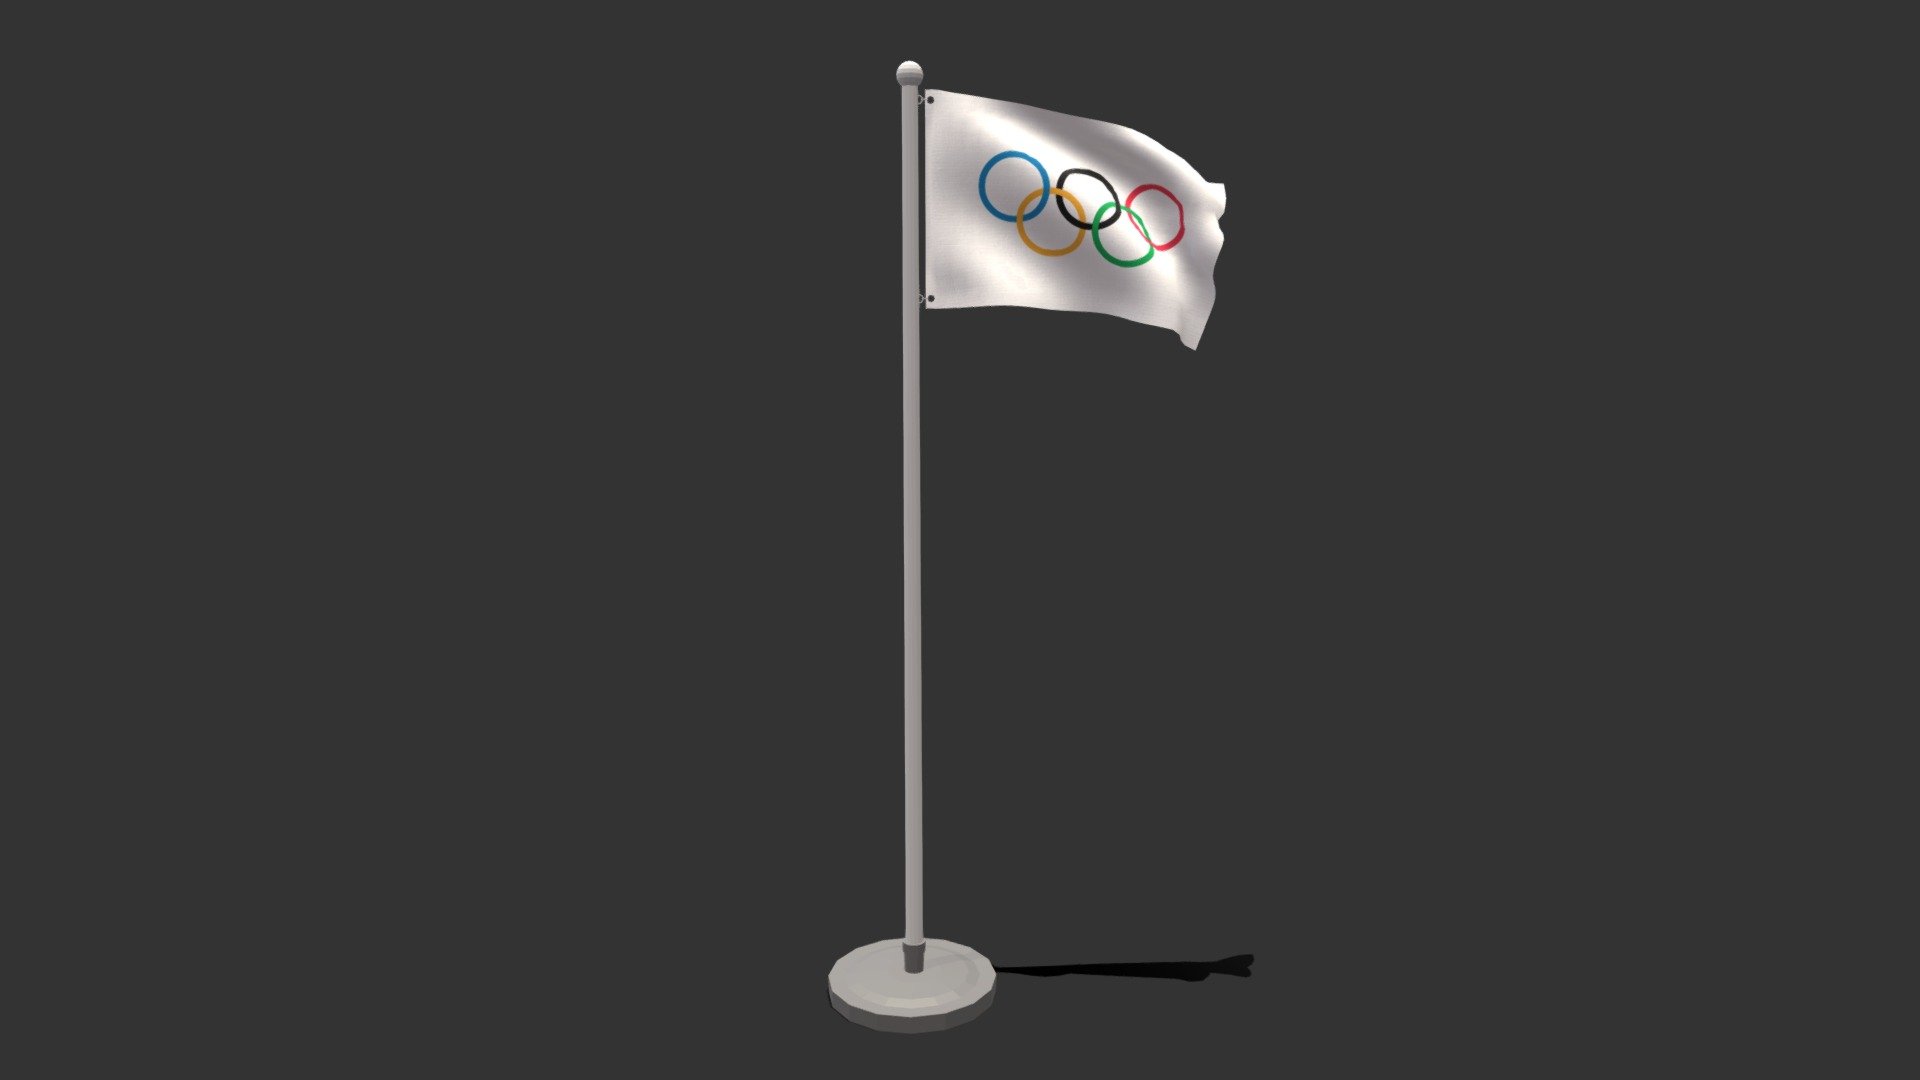 This is a low poly 3d model of an animated Olympic flag . The low poly flag was modeled and prepared for low-poly style renderings, background, general cg visualization presented as 2 meshes with quads only.

Verts : 1.536 Faces : 1.459.

1024x1024 textures included. diffuse, roughness and normal maps available only for flag. the pole have simple materials with colors.

The animation is based on shapekeys, 248 frames and seamless, no rig included.

The original file was created in blender. you will receive a obj, fbx, blend, dae, stl, glTF, abc.

Please note animation icluded only in blend, abc and glTF files.

Warning: depending on which software package you are using, the exchange formats (.obj , .dae, .fbx) may not match the preview images exactly. Due to the nature of these formats, there may be some textures that have to be loaded by hand and possibly triangulated geometry 3d model